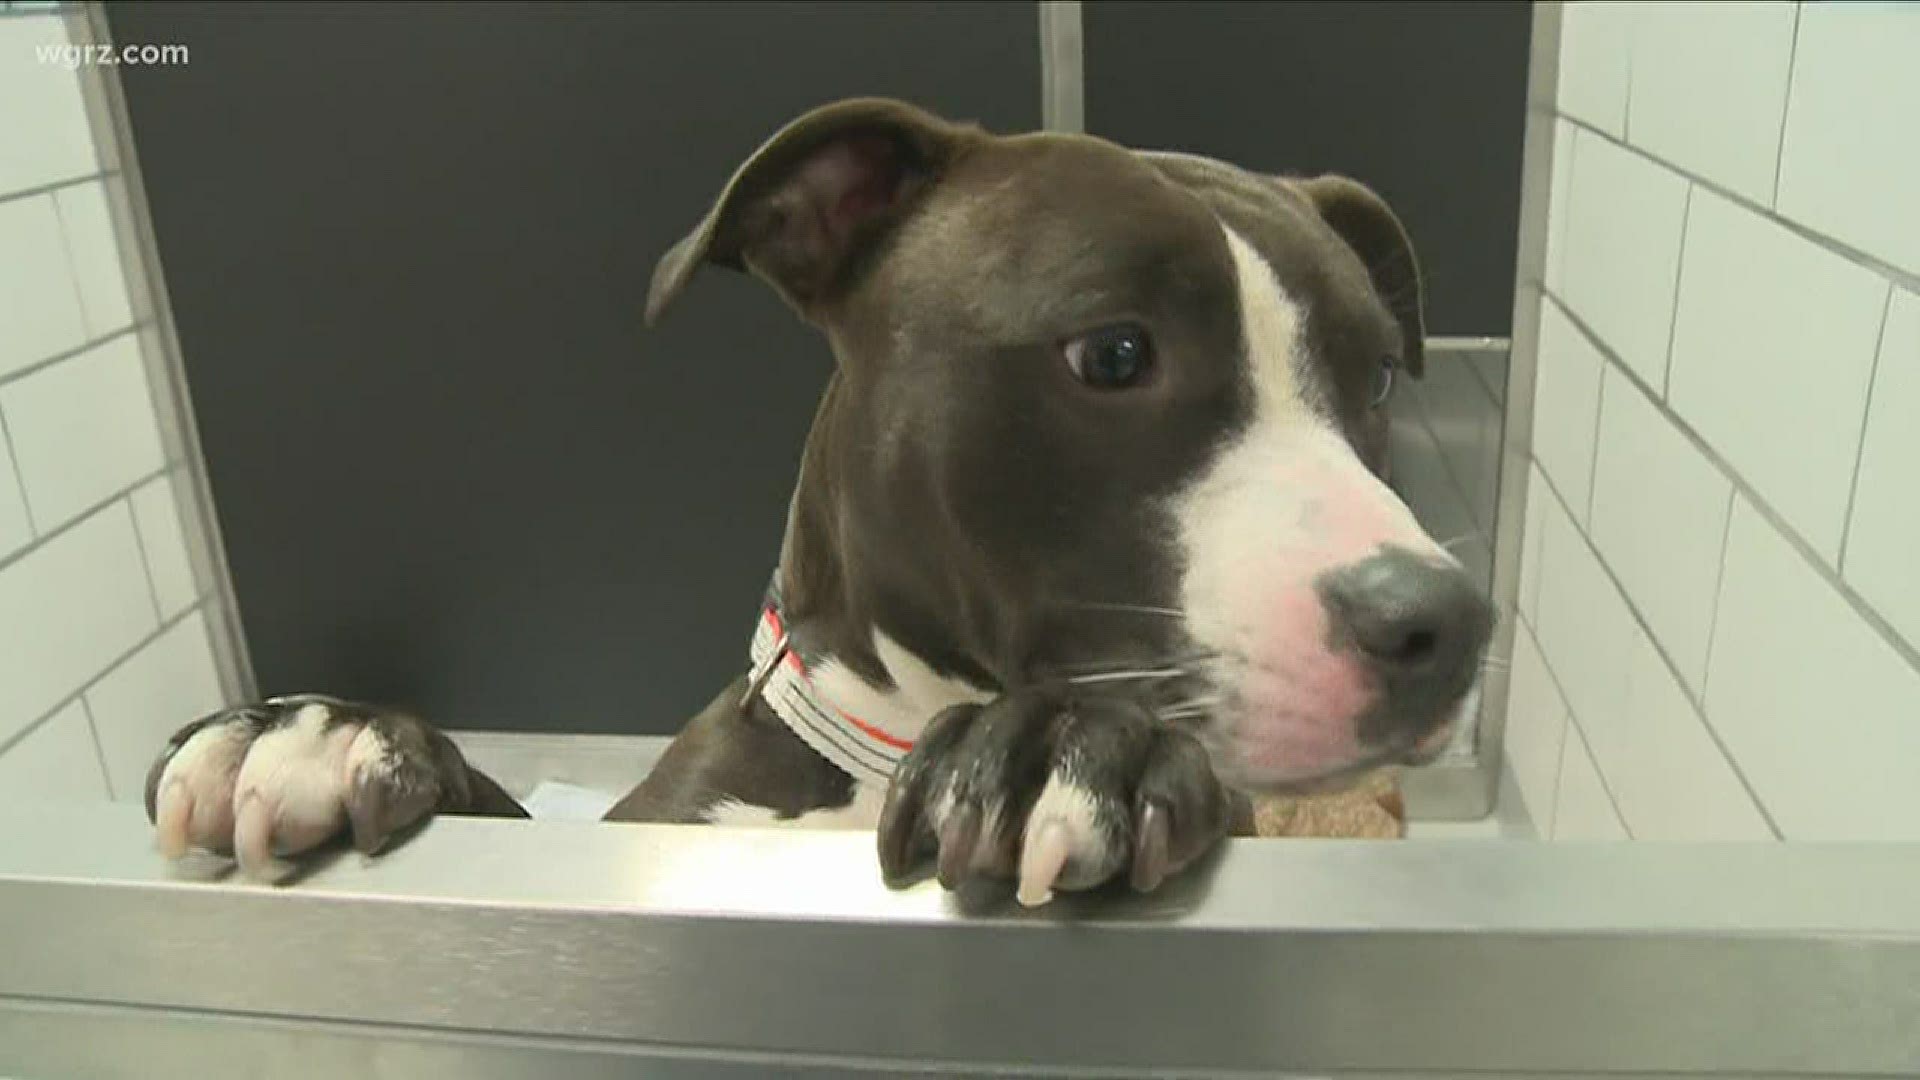 Hundreds of animals have been adopted in Western New York during the coronavirus pandemic, but others are still in need of homes.